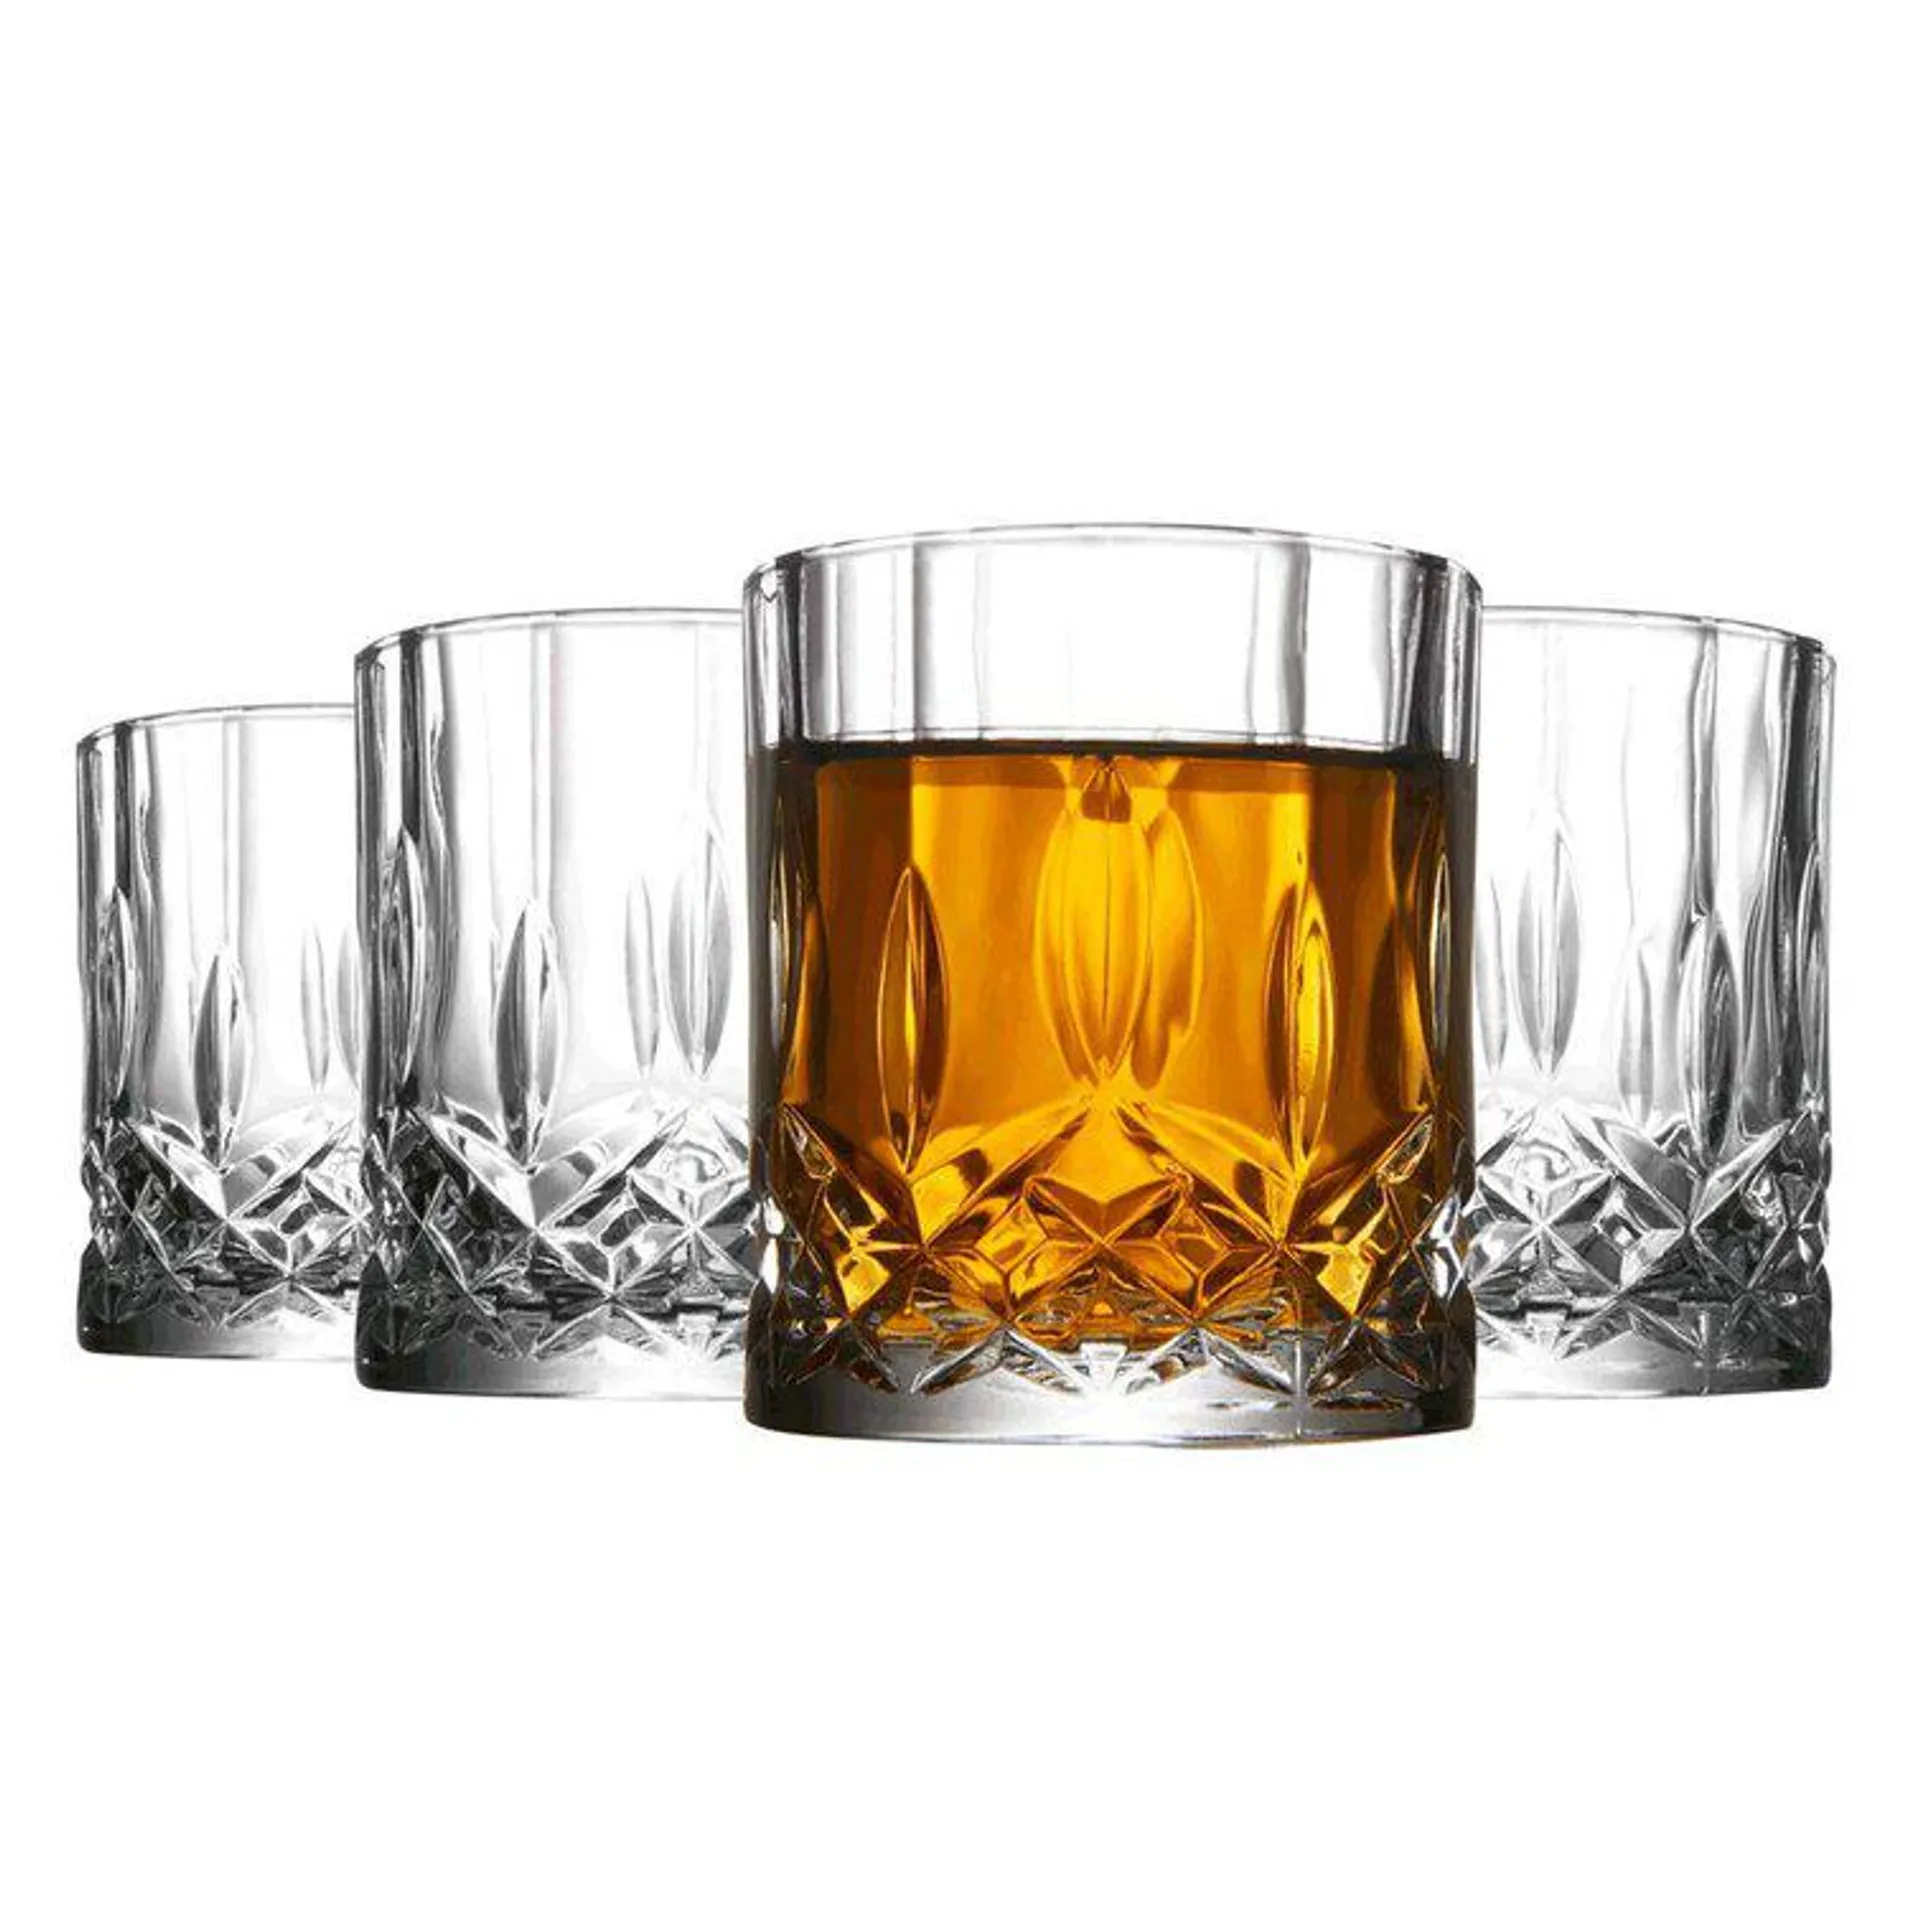 Whiskey Glasses Crystal Beverage Drinking Cups For Beer Liquor Water Lead Free, Set Of 4, Medium (Set of 4)